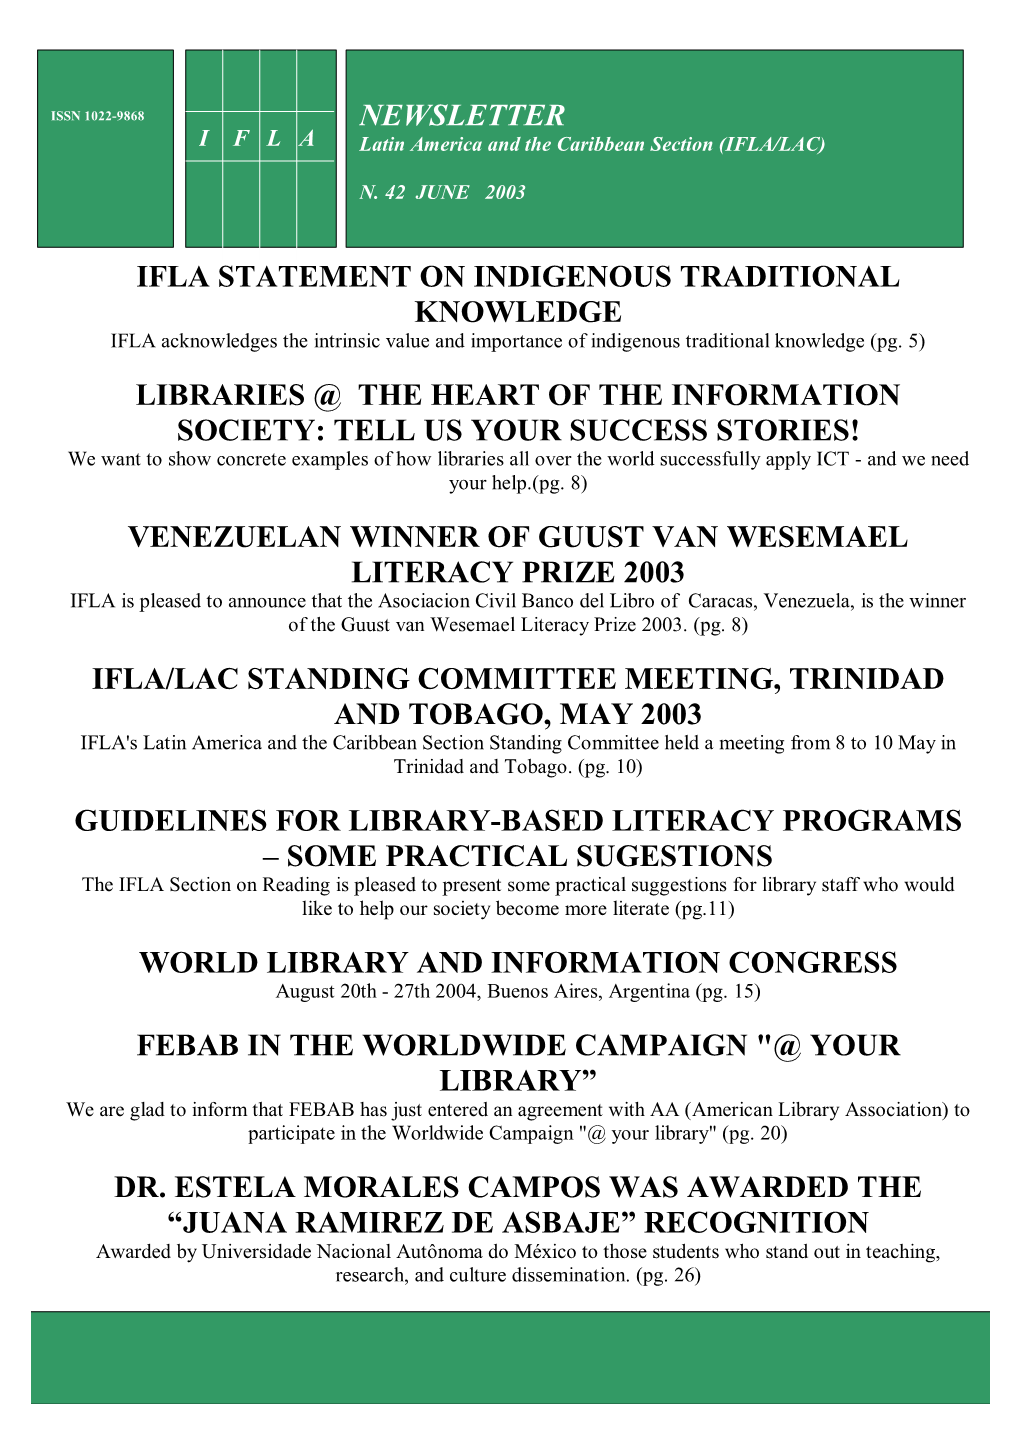 3 Ifla Statement on Indigenous Traditional Knowledge Libraries @ the Heart of the Information Society: Tell Us Your Success